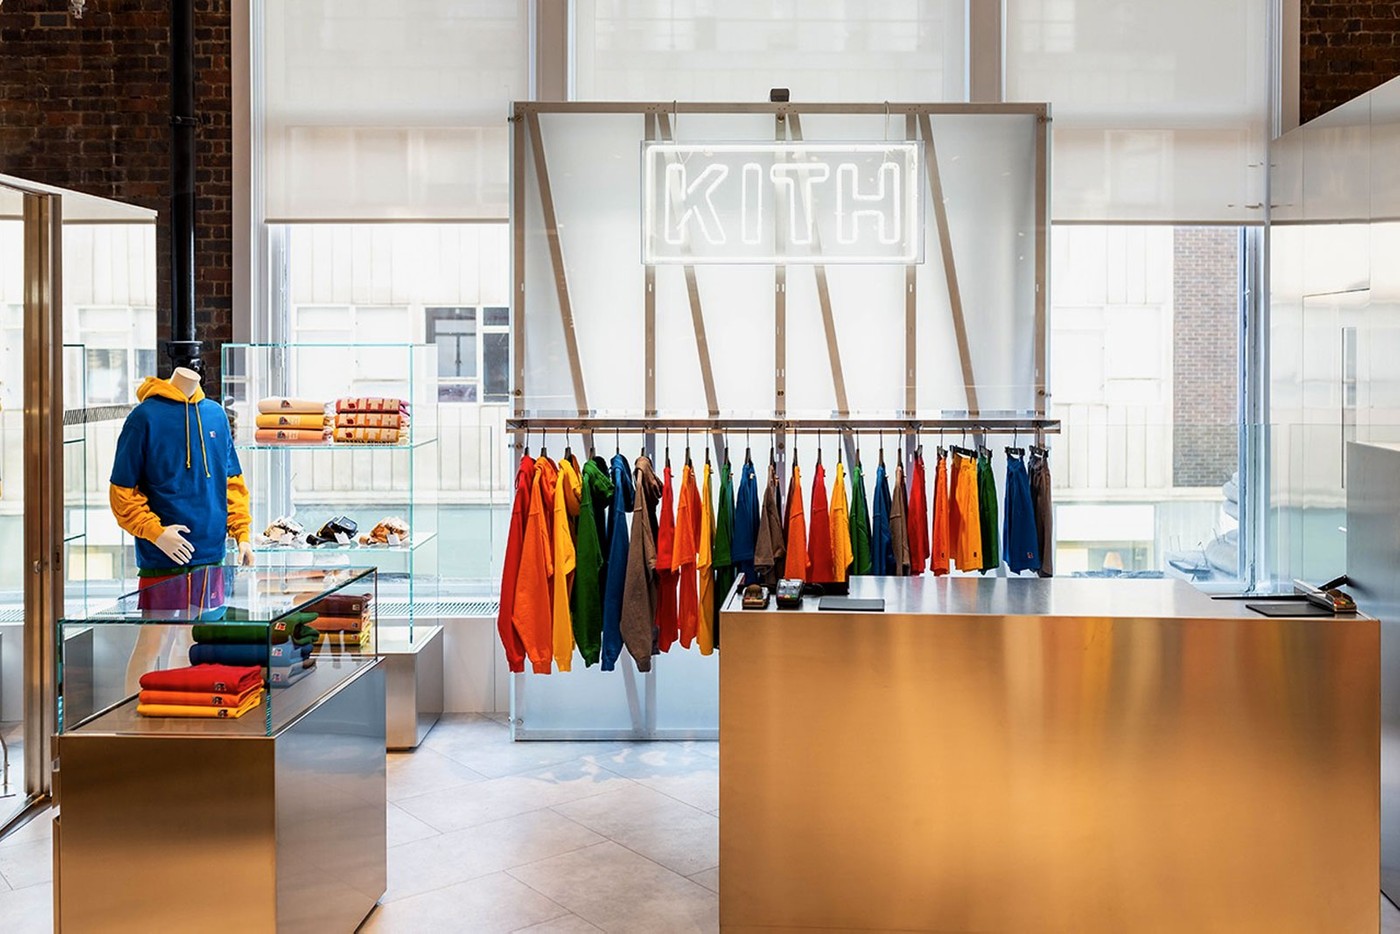 Https___hypebeast.com_image_2019_06_kith-paris-flagship-store-opening-1